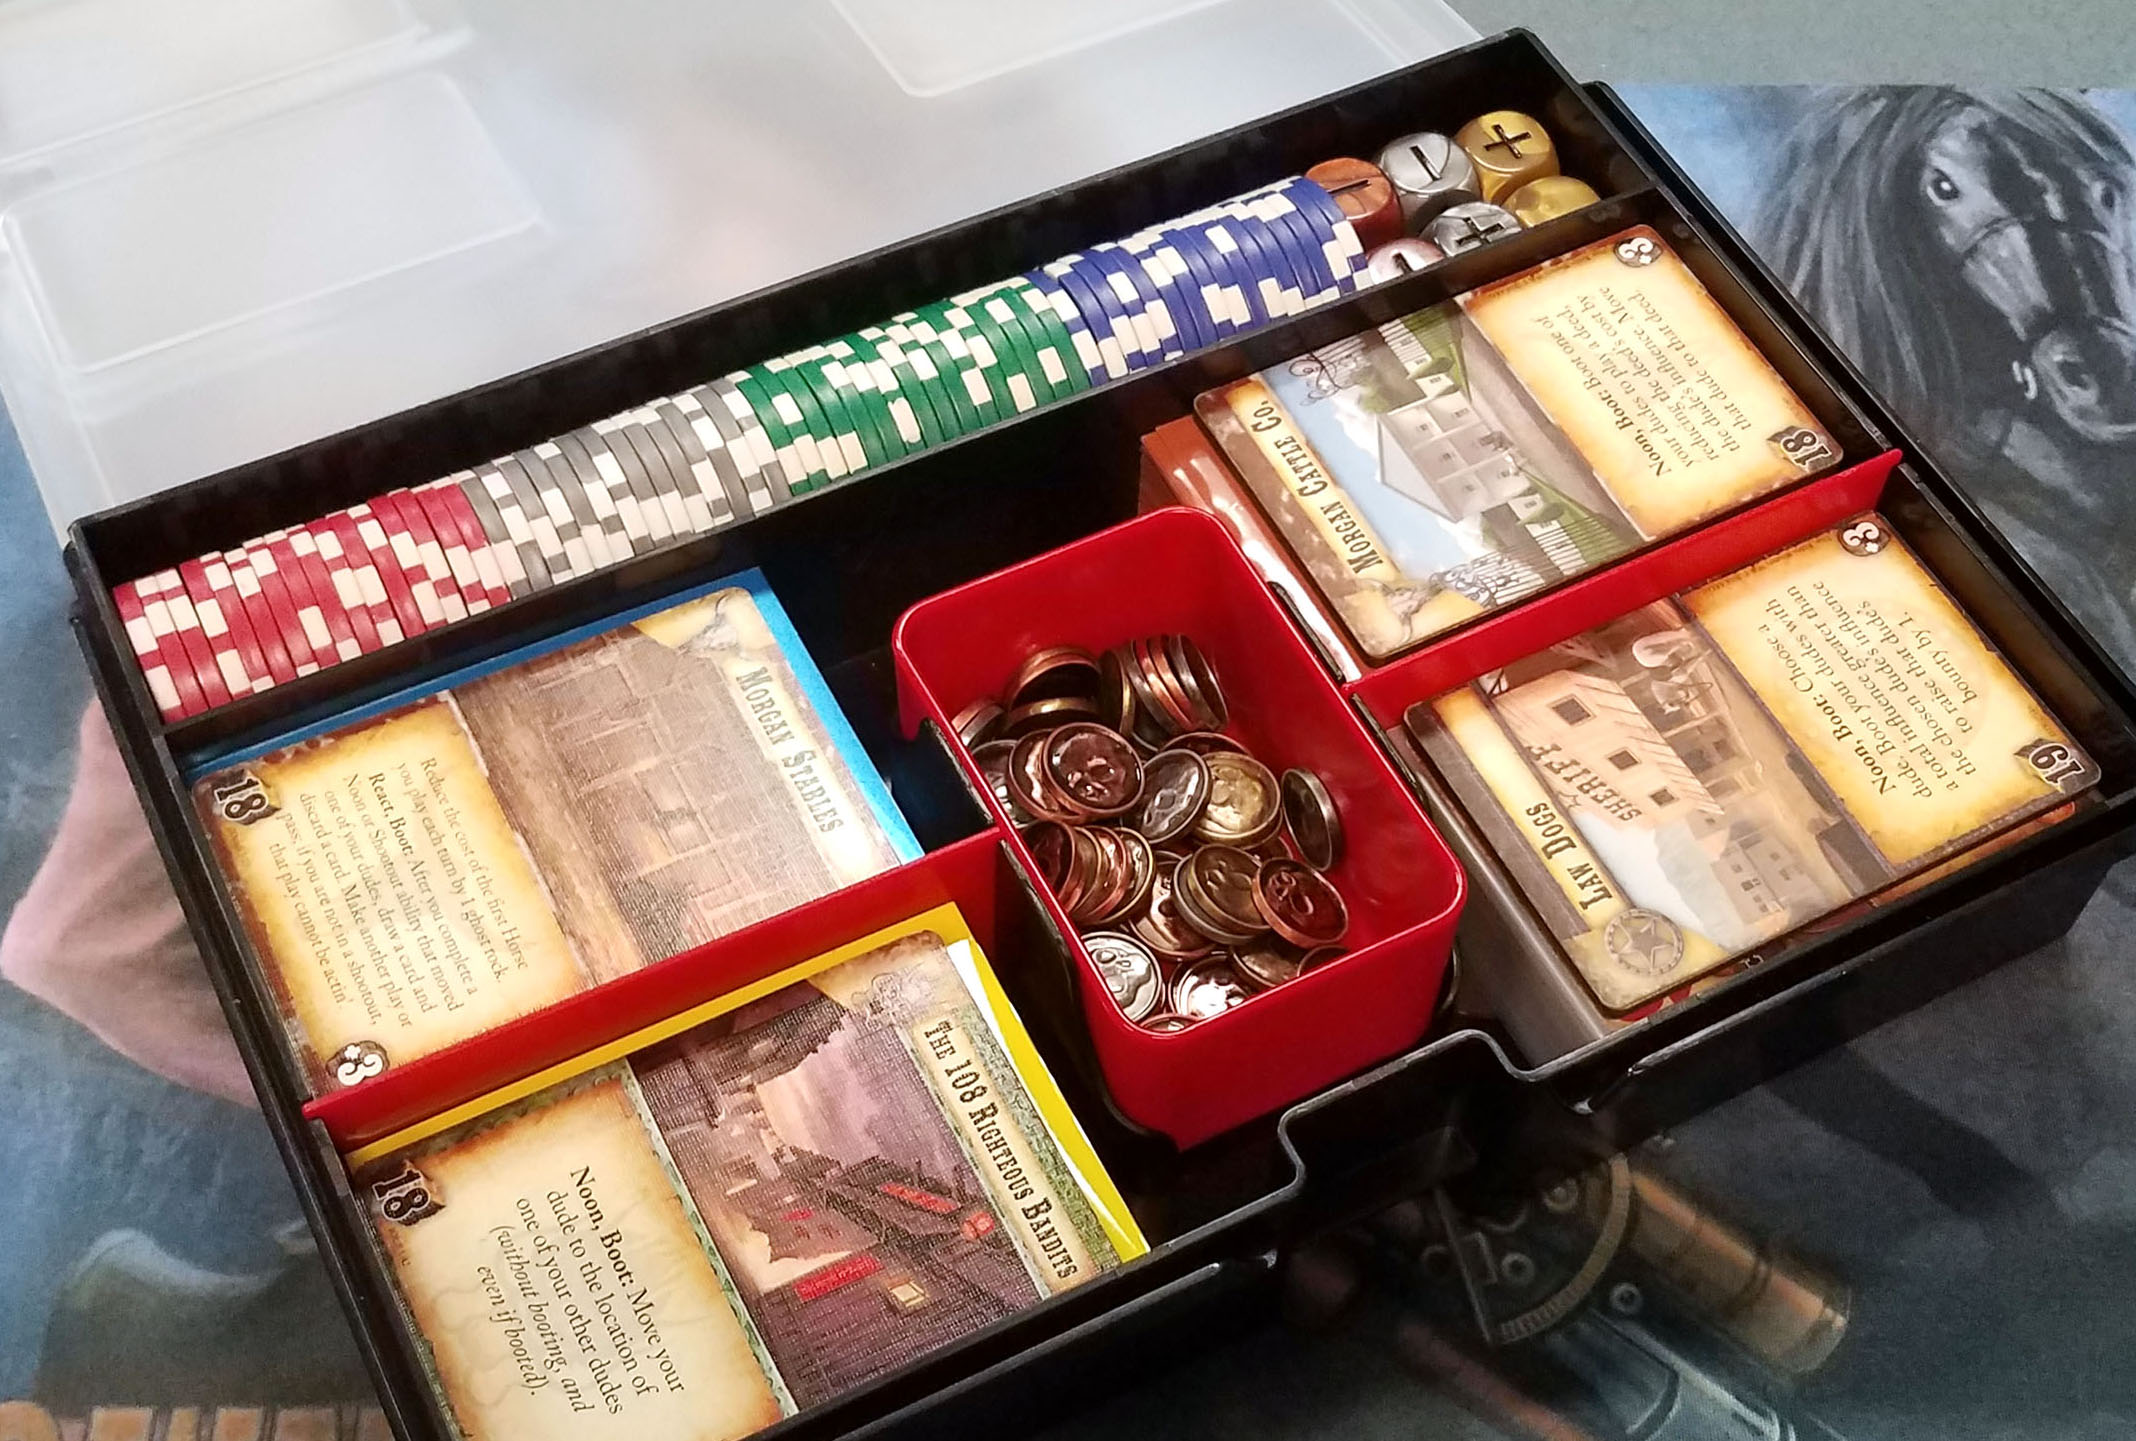 Doomtown decks with accessories in a Prime X4 box